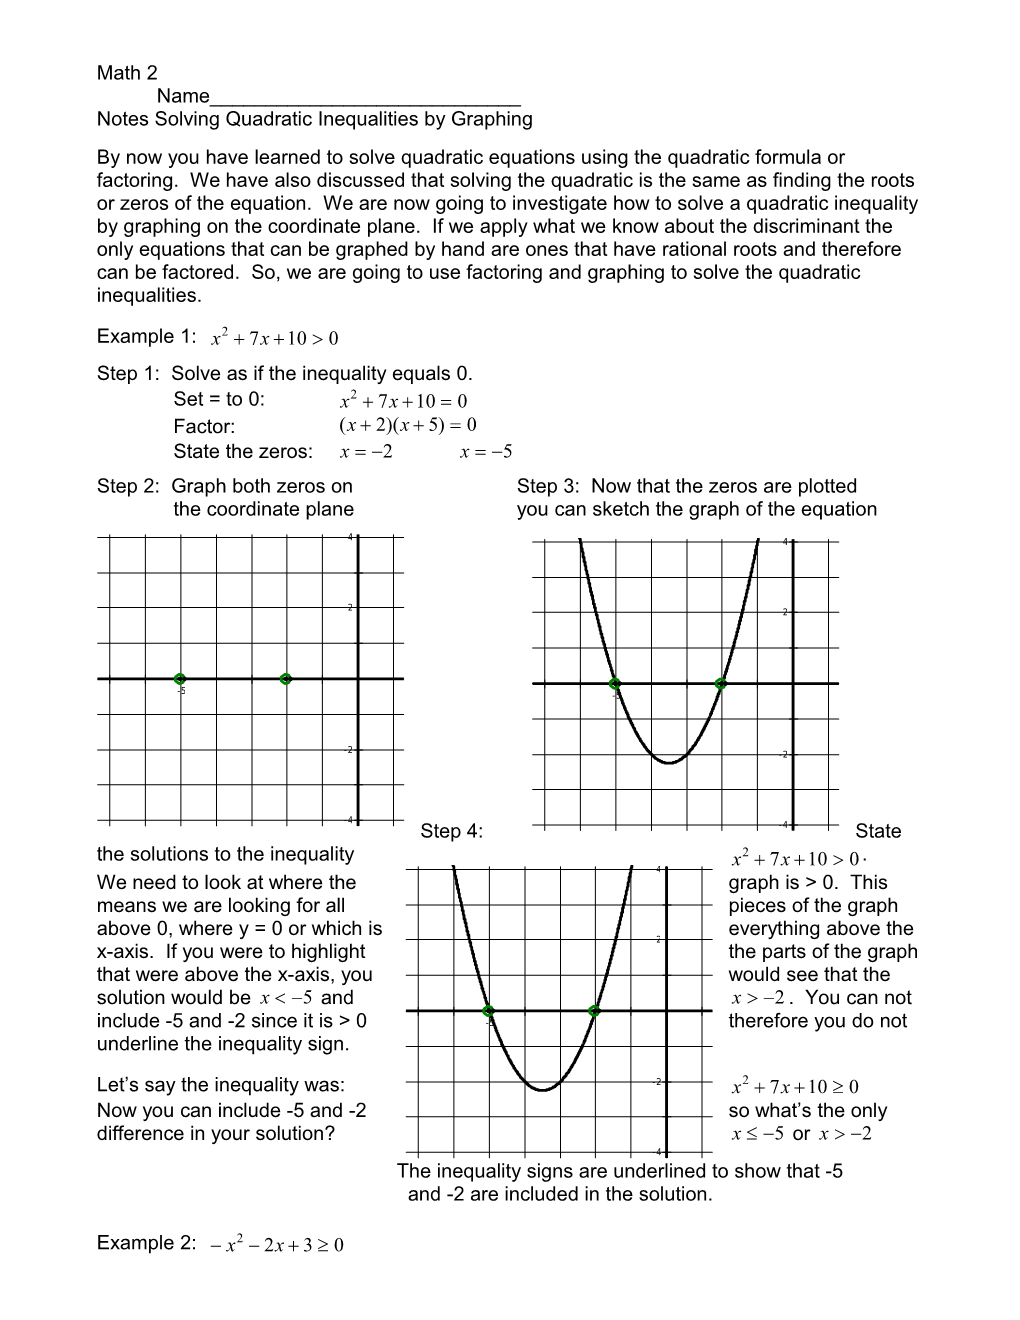 Notes Solving Quadratic Inequalities by Graphing